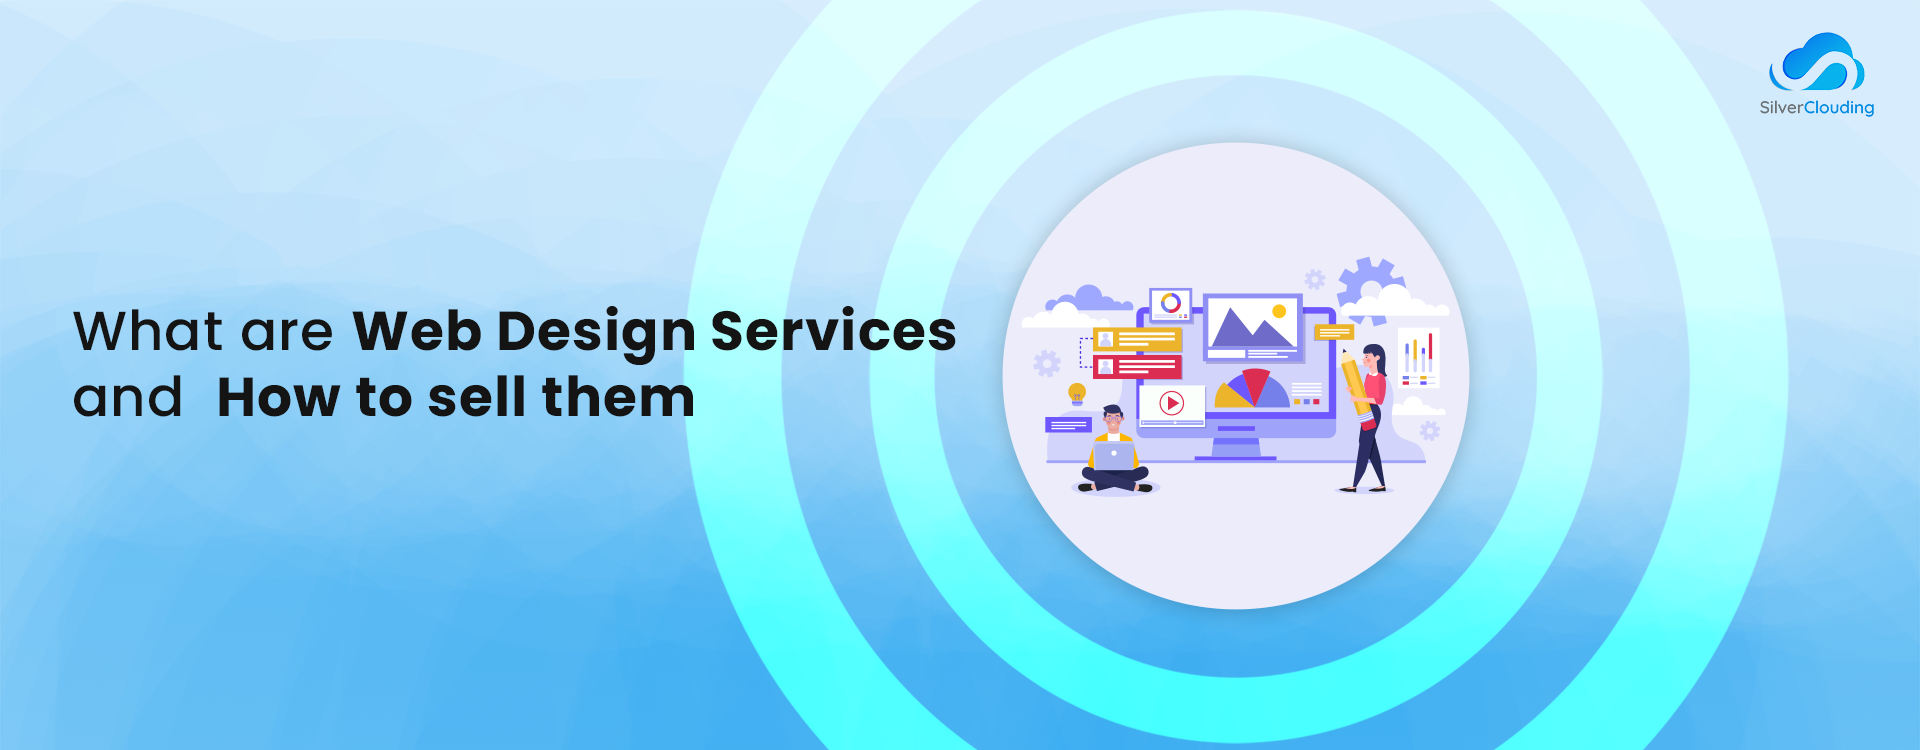 What are Web Design Services and How to sell them